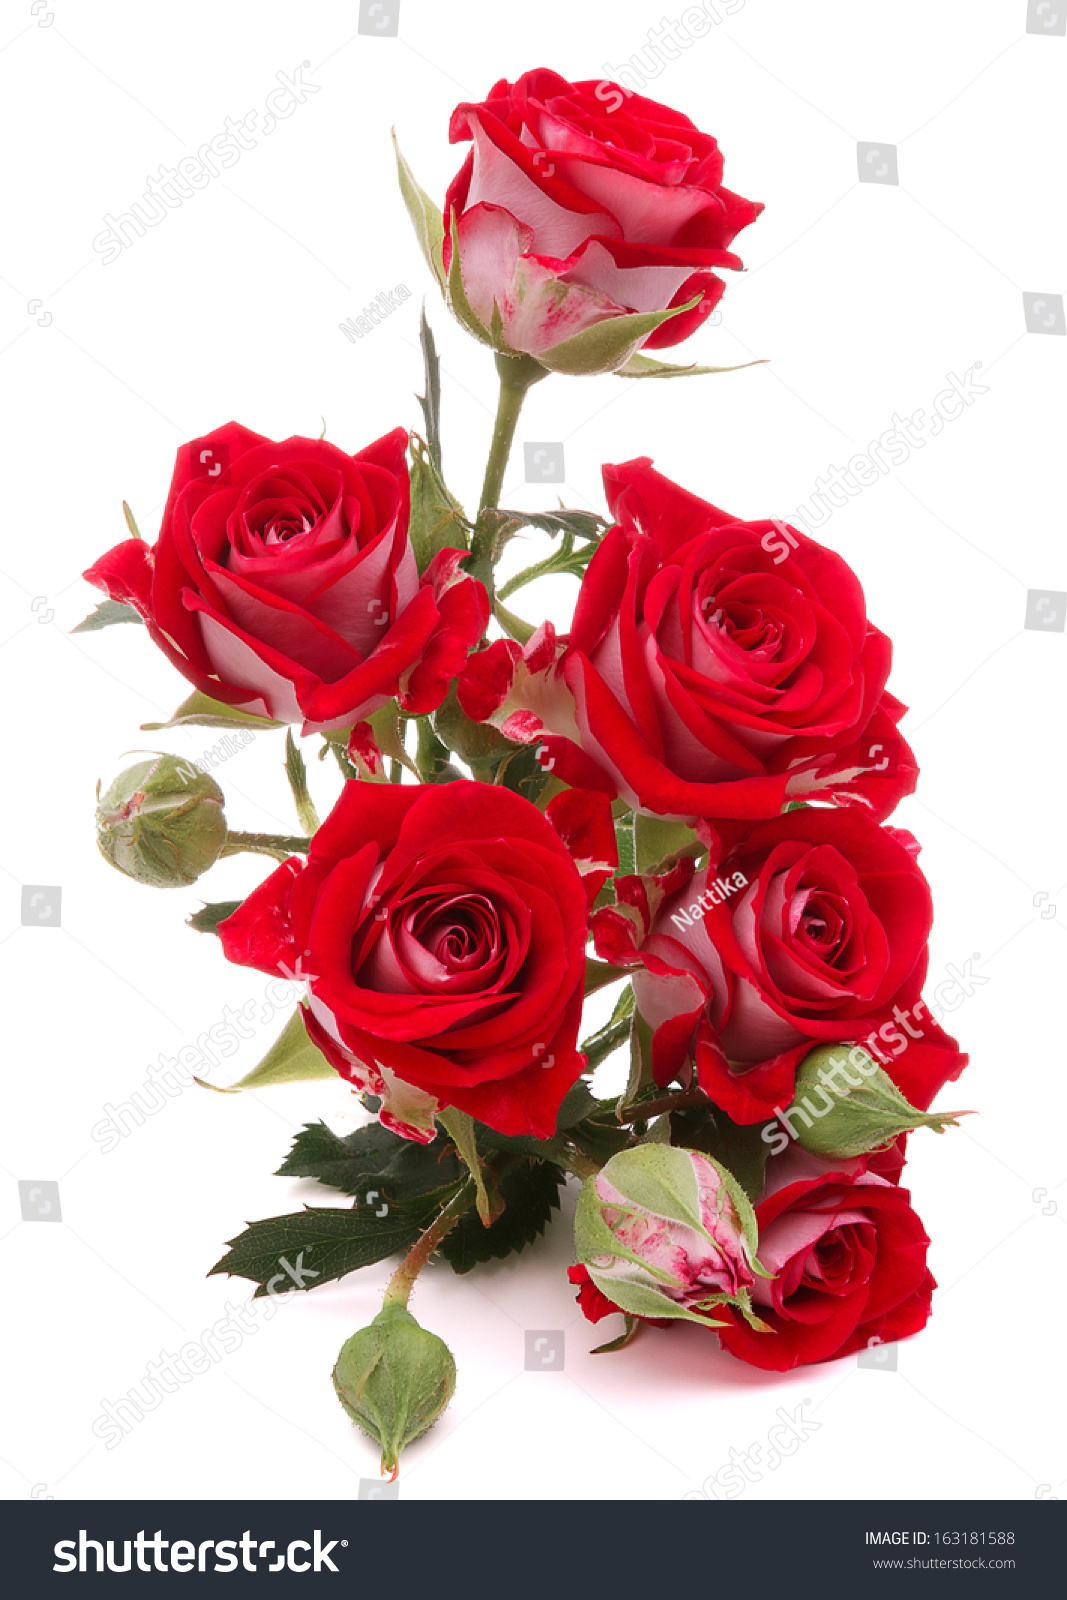 Red Rose Flower Bouquet Isolated On Stock Photo 163181588 - Shutterstock